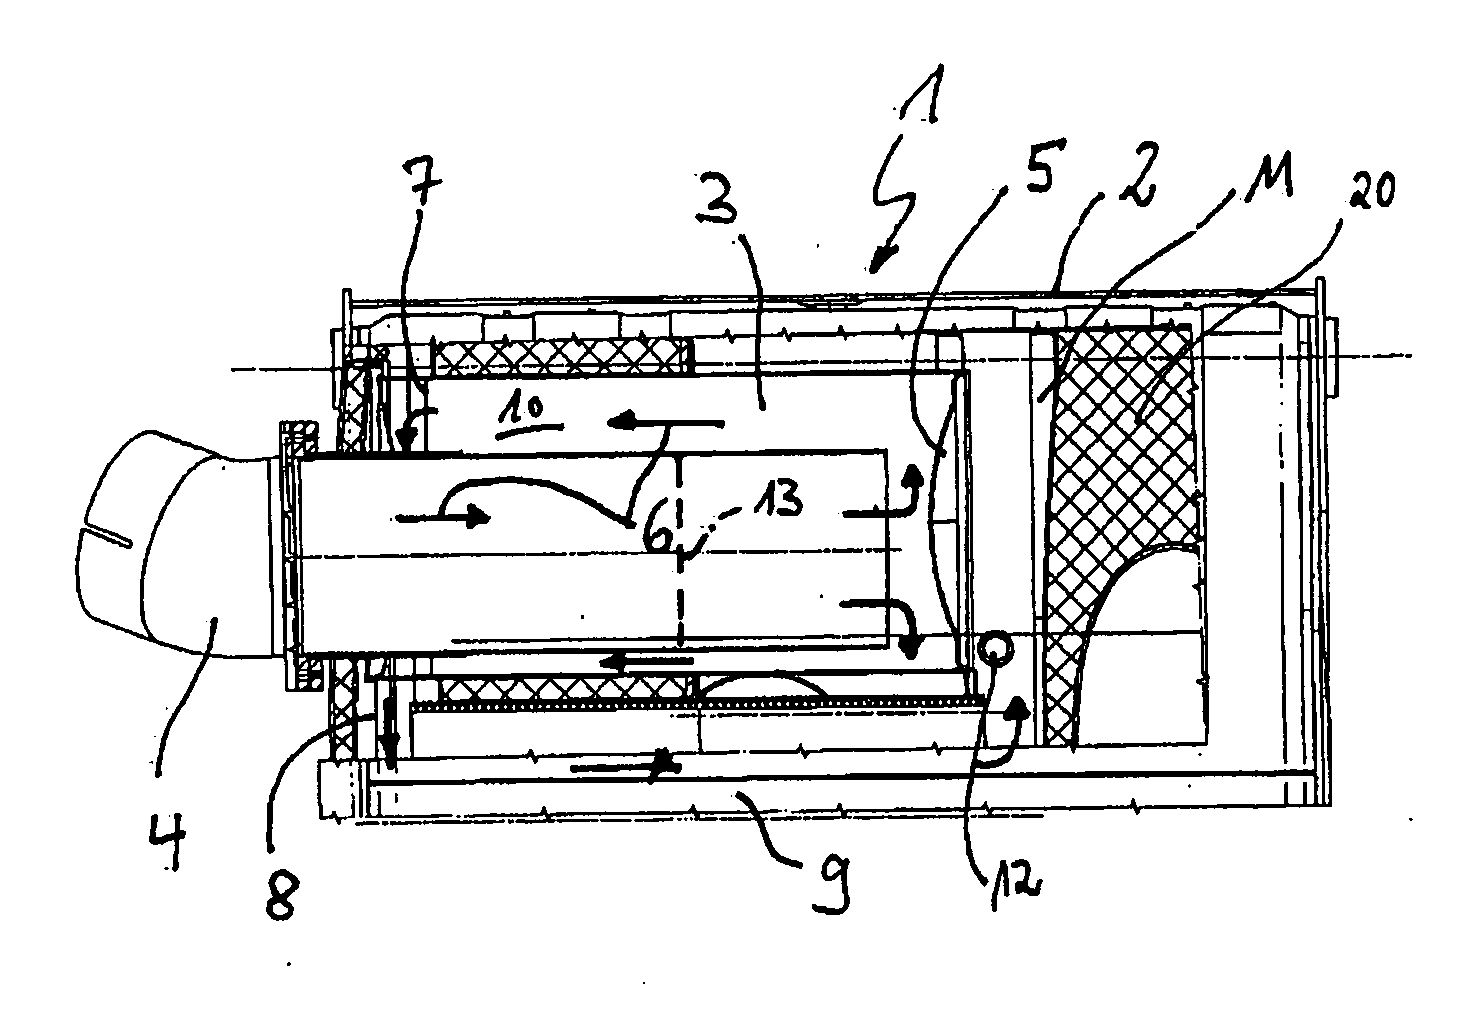 Exhaust gas aftertreatment device for an internal combustion engine